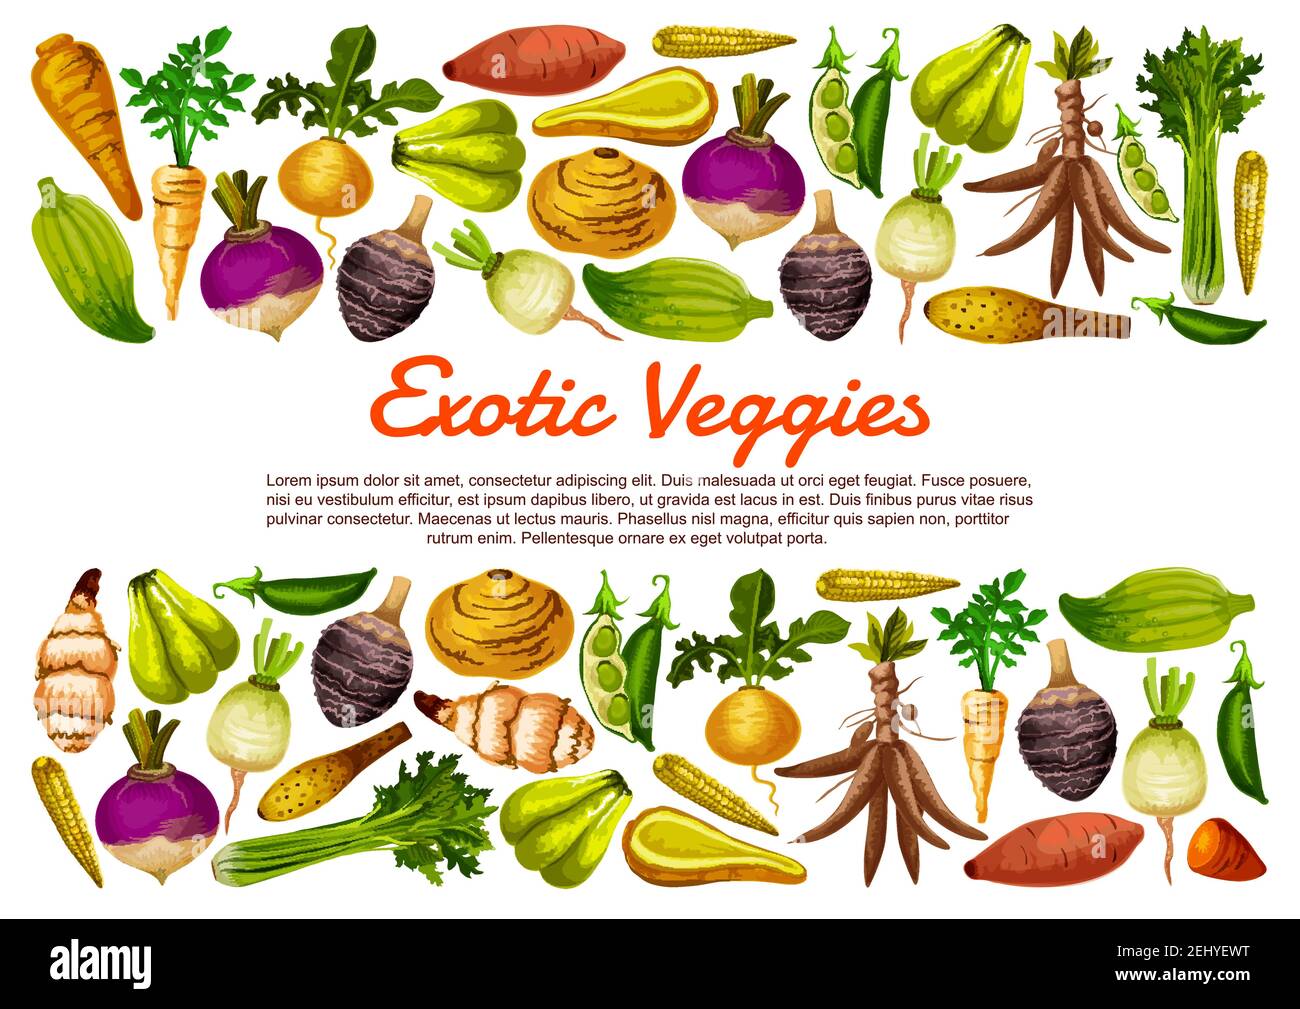 Root vegetables and exotic veggies farm harvest poster. Vector Jerusalem artichoke, radish and sweet potato with cassava, parsnip celery and bread bea Stock Vector